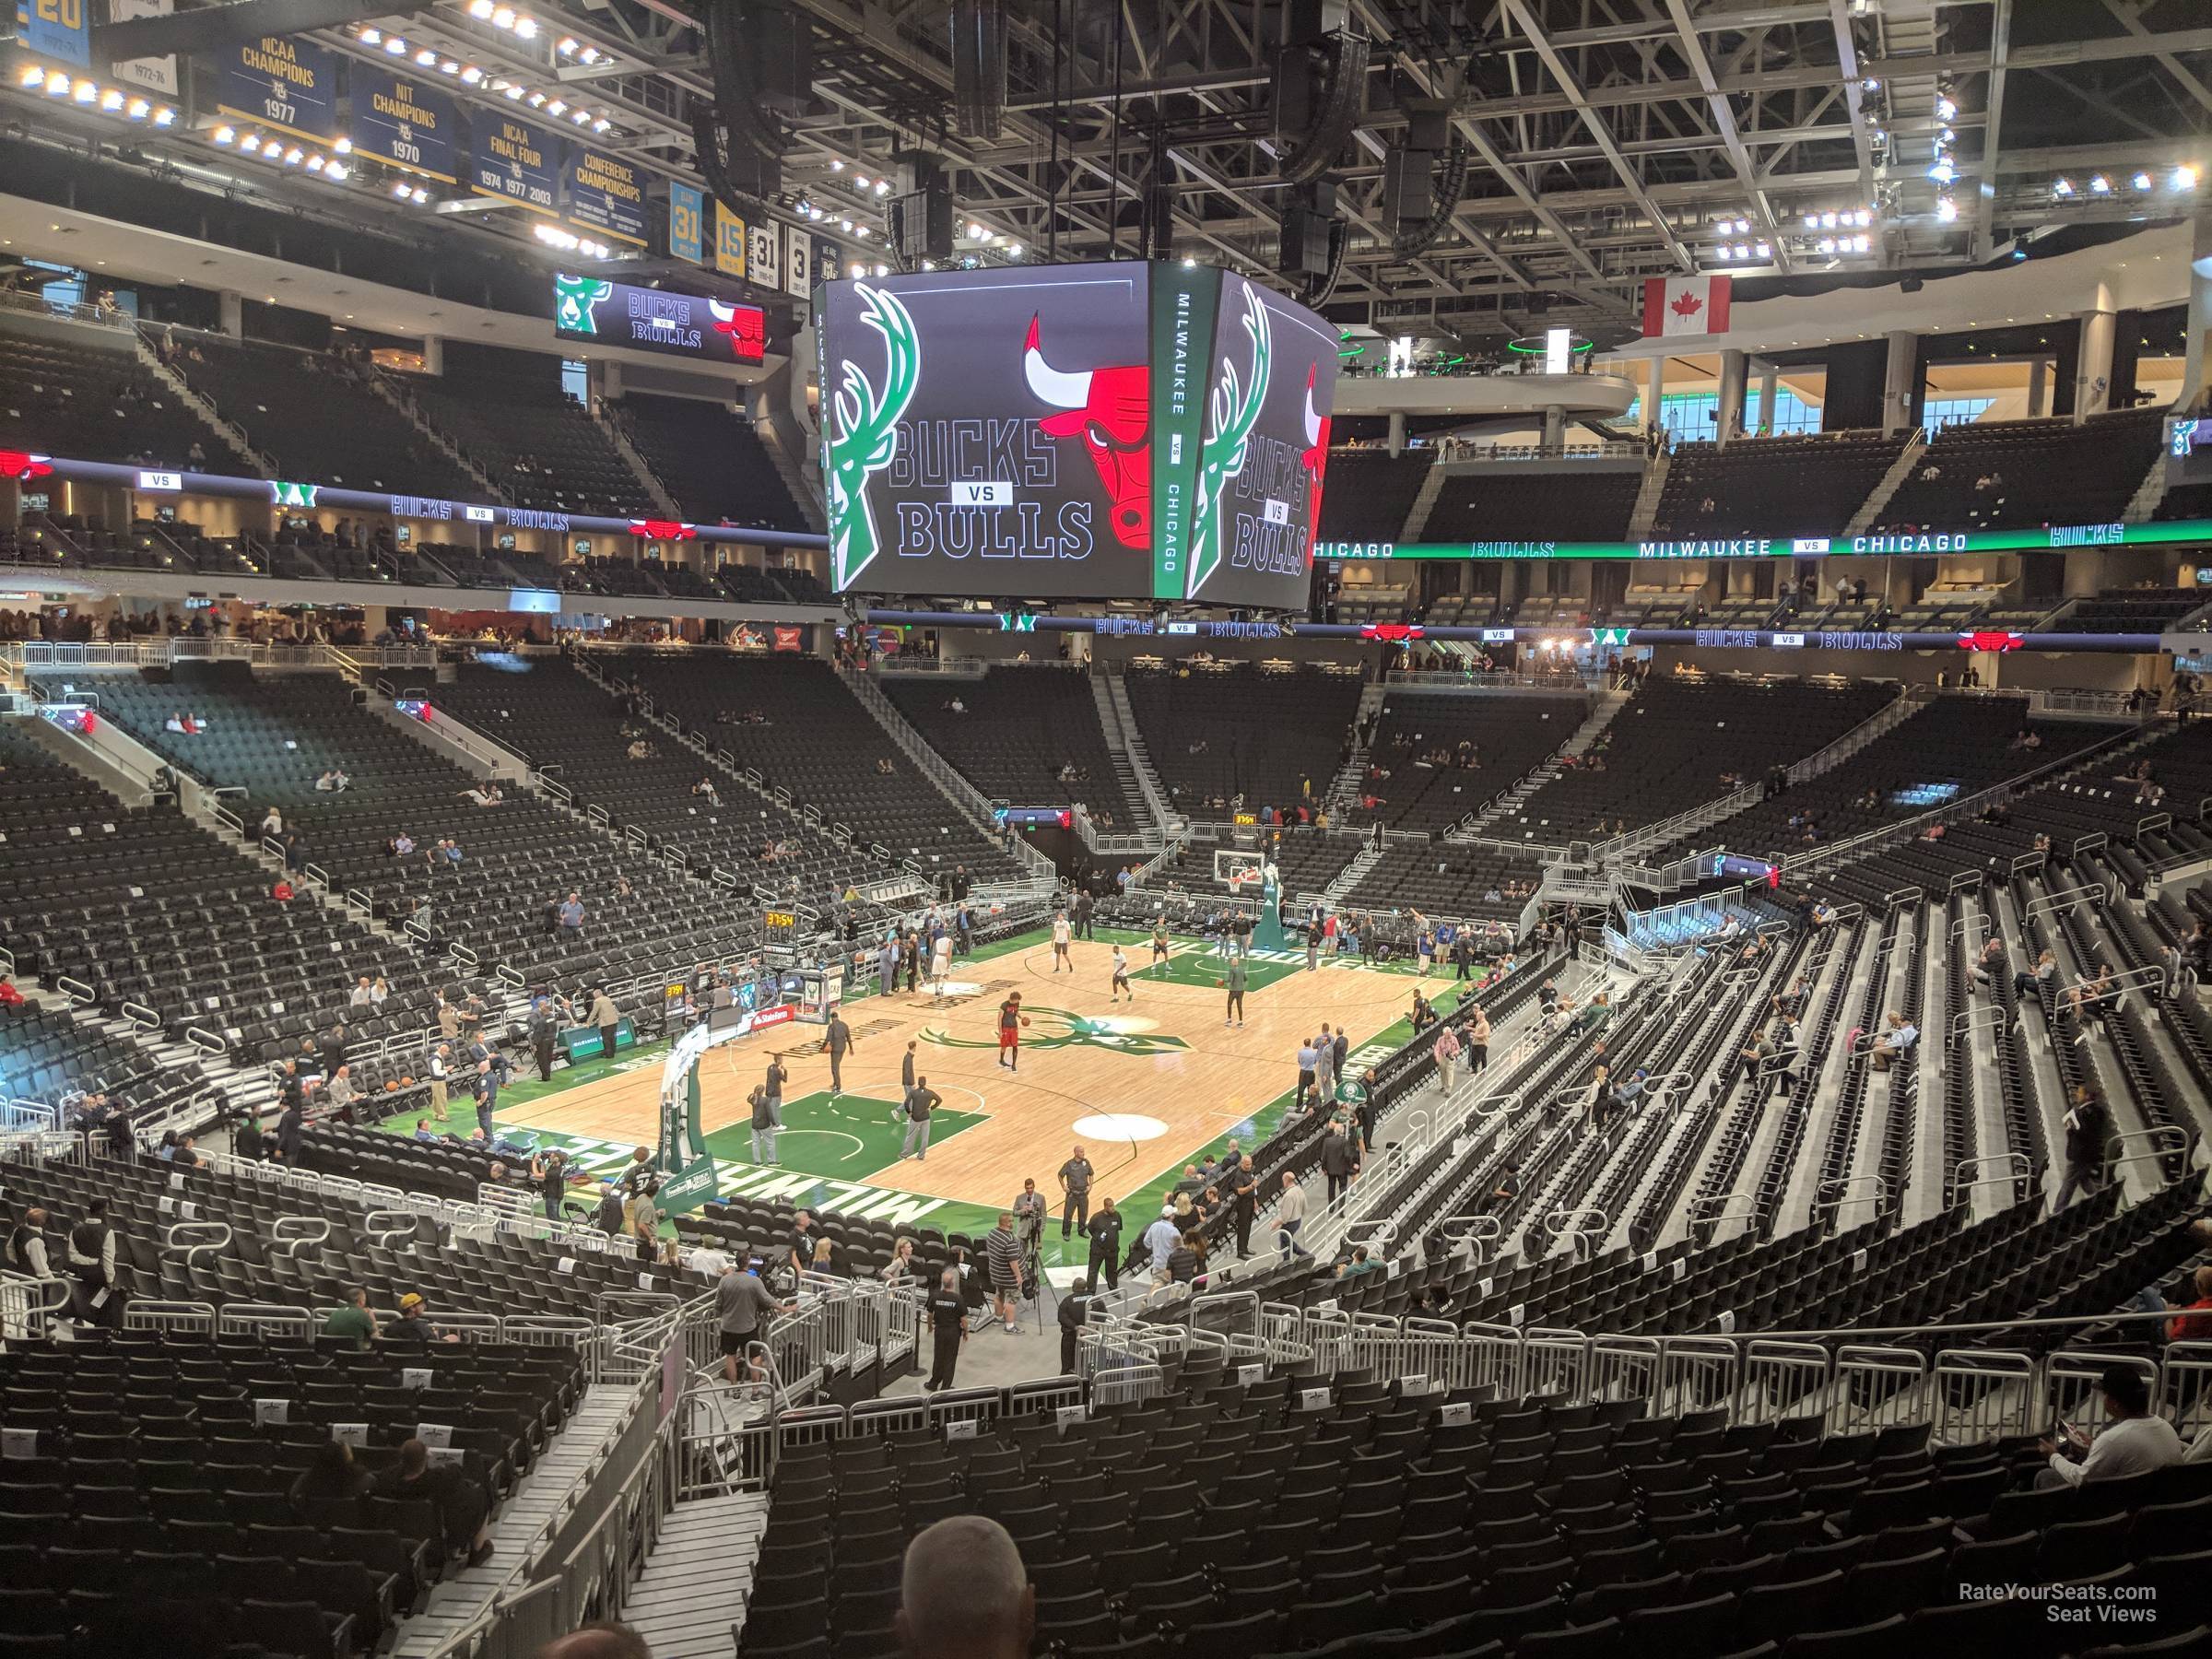 Basketball Seat View From Section 109, Row 28. section 109, row 28 seat vie...